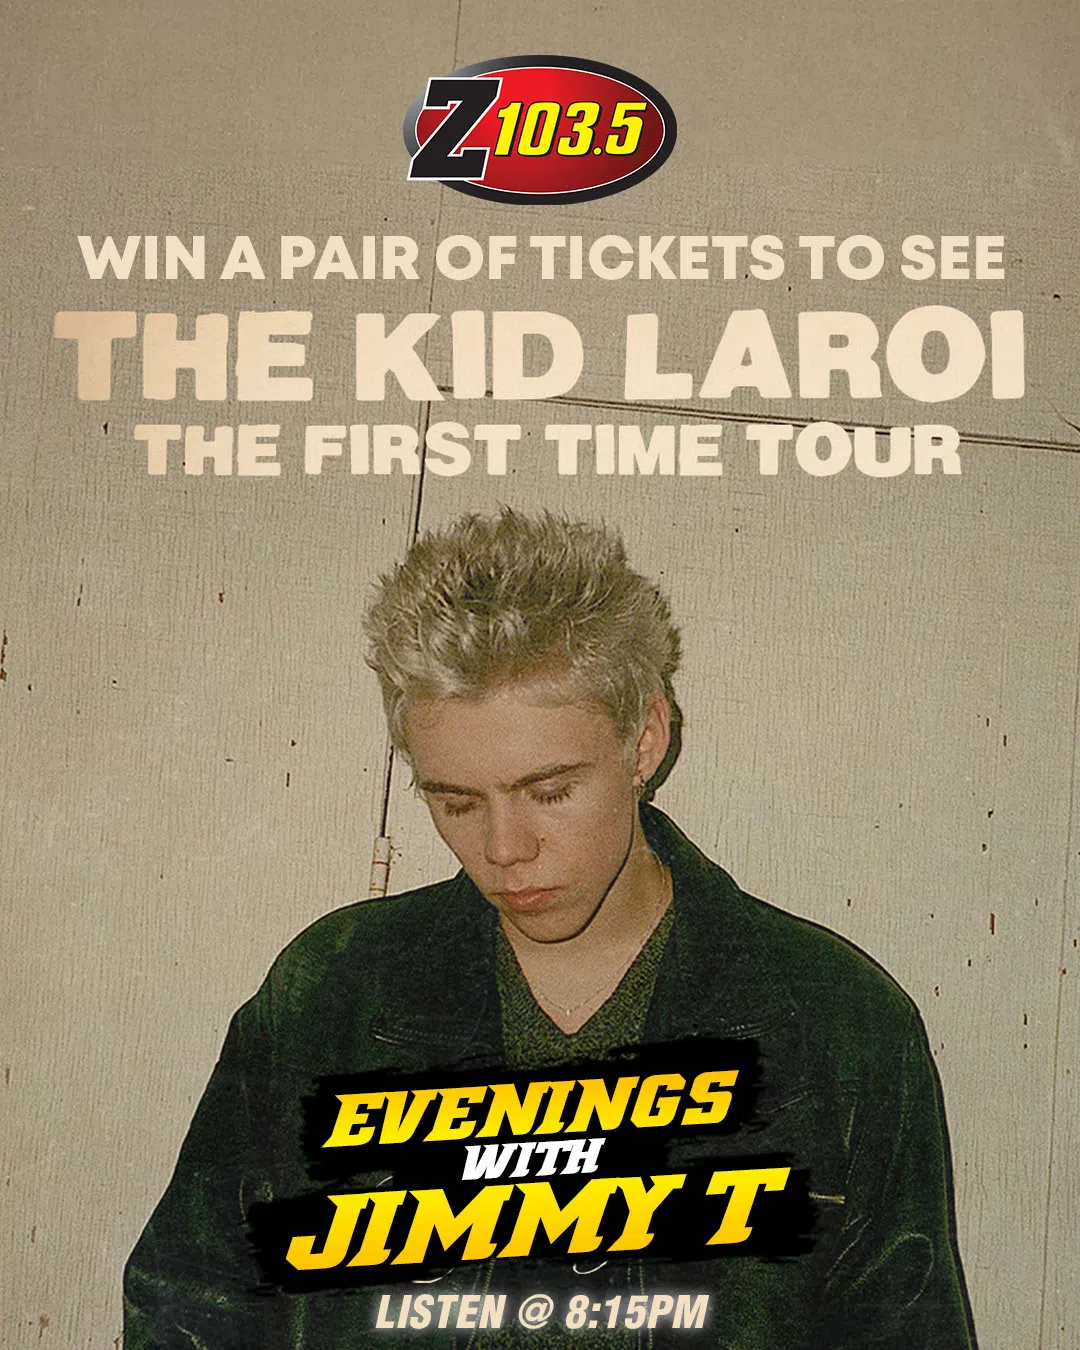 Feature: https://z1035.com/win/win-tickets-to-see-kid-laroi/